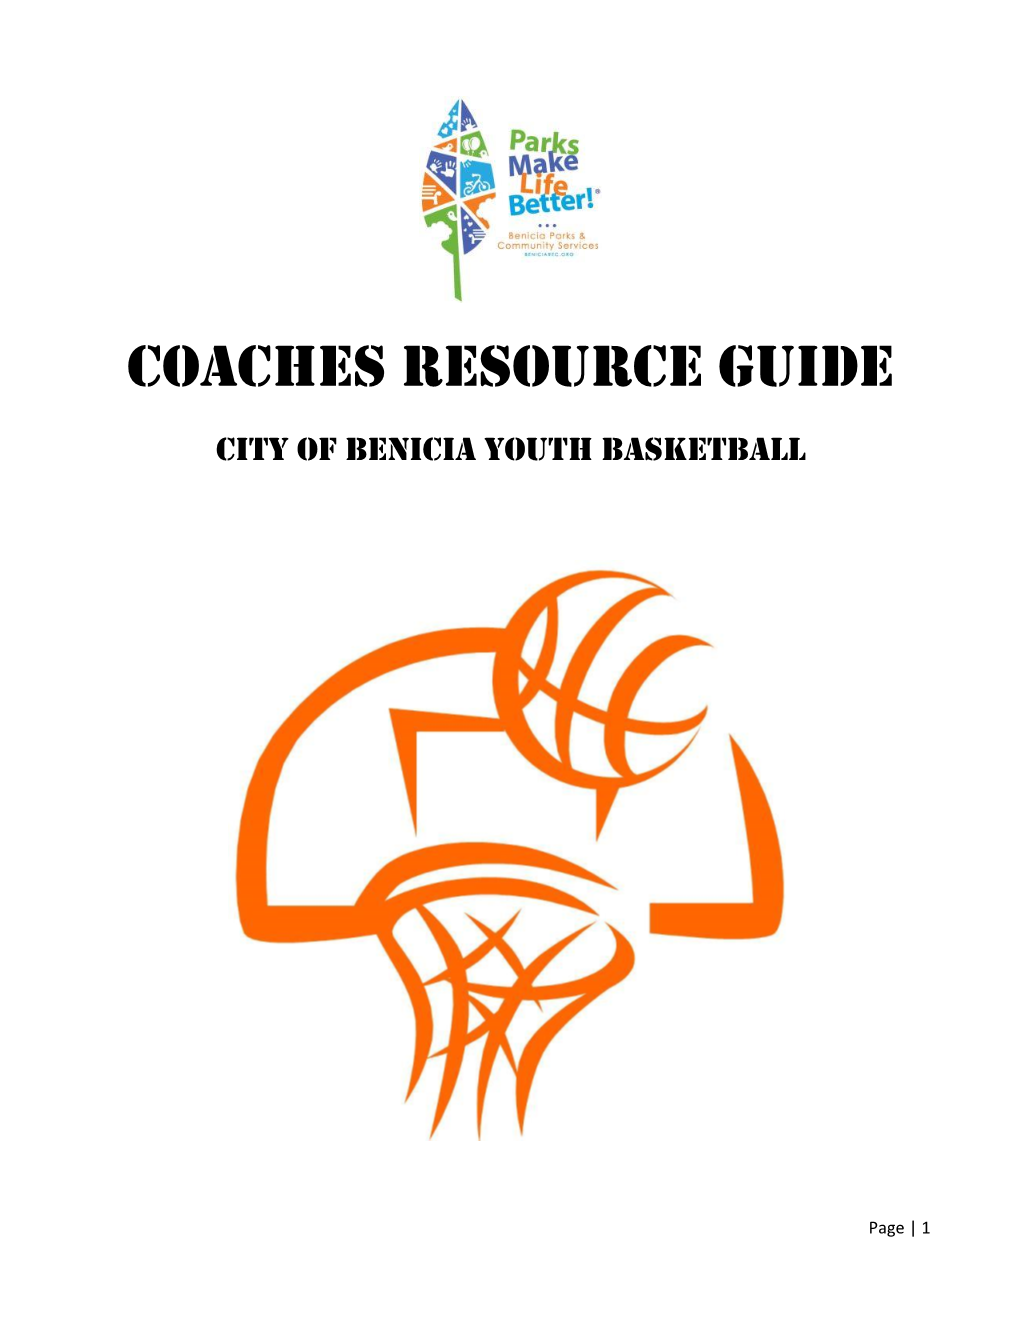 Coaches Resource Guide